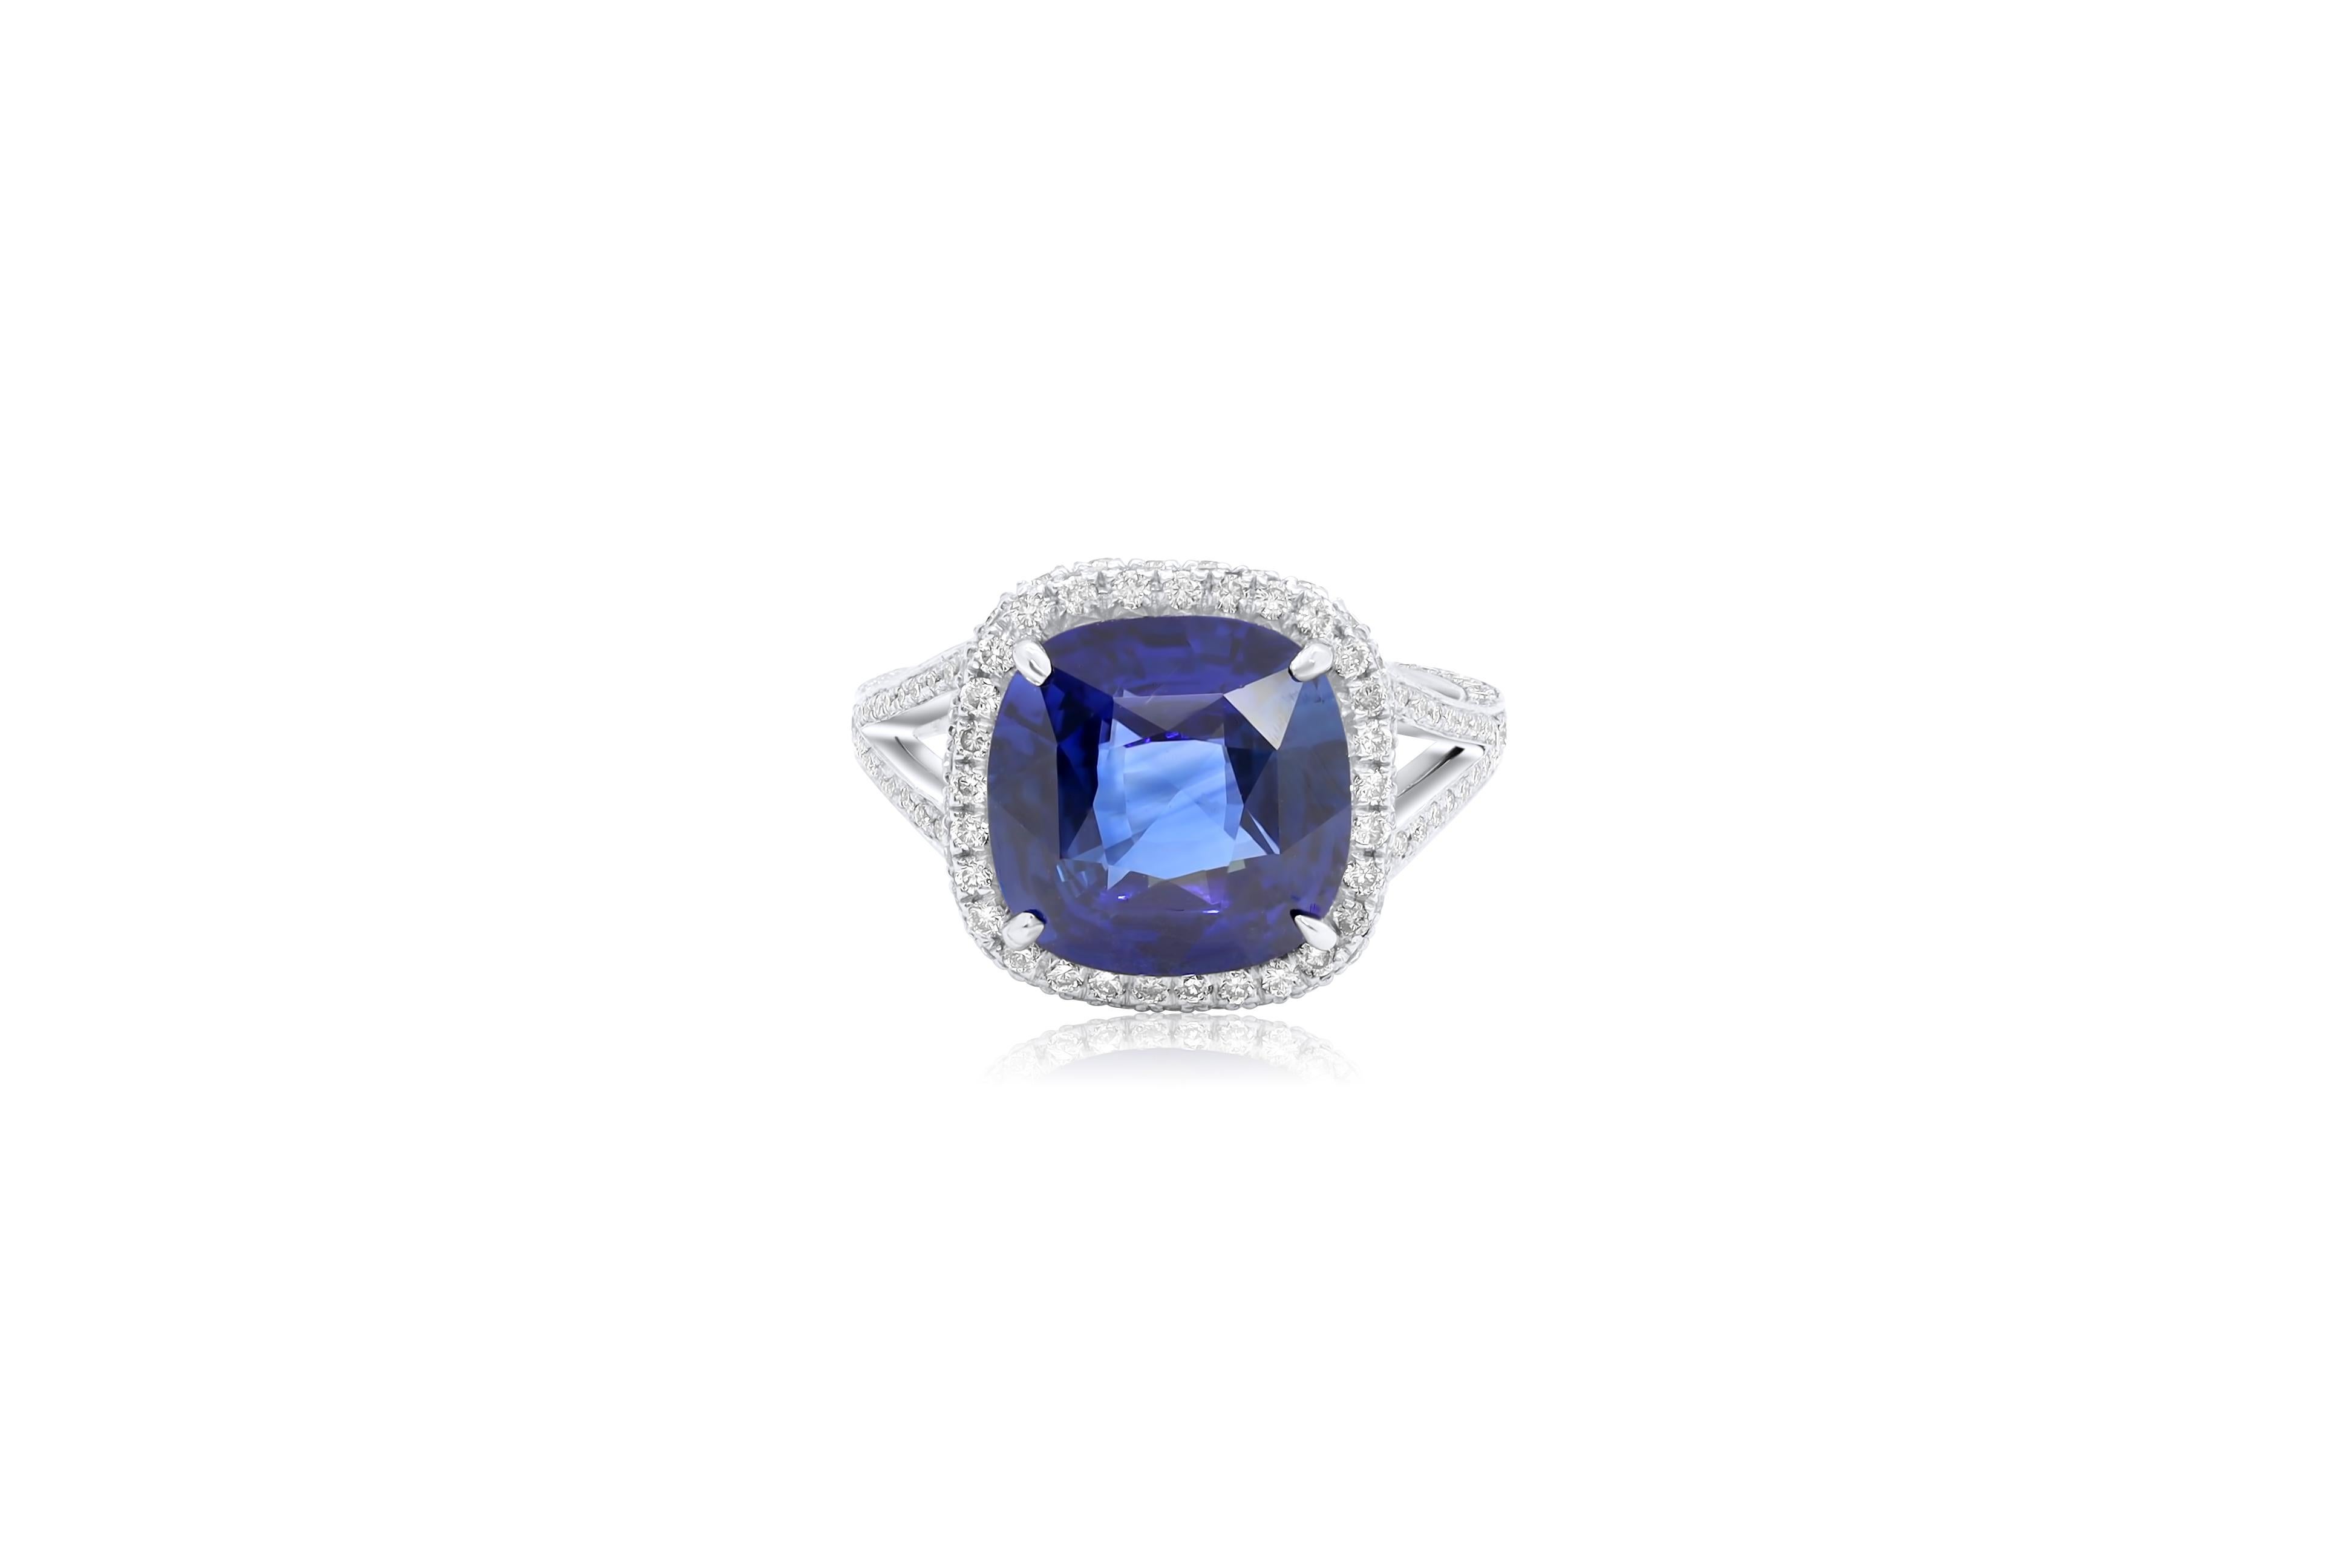 Platinum sapphire diamond ring featuring a 6.99 ct Sri Lanka natural cushion cut ceylon sapphire (C.DUNAIGRE CERTIFIED#CDC2108201)set with 1.64 cts tw of diamonds in a halo setting.
Diana M. is a leading supplier of top-quality fine jewelry for over